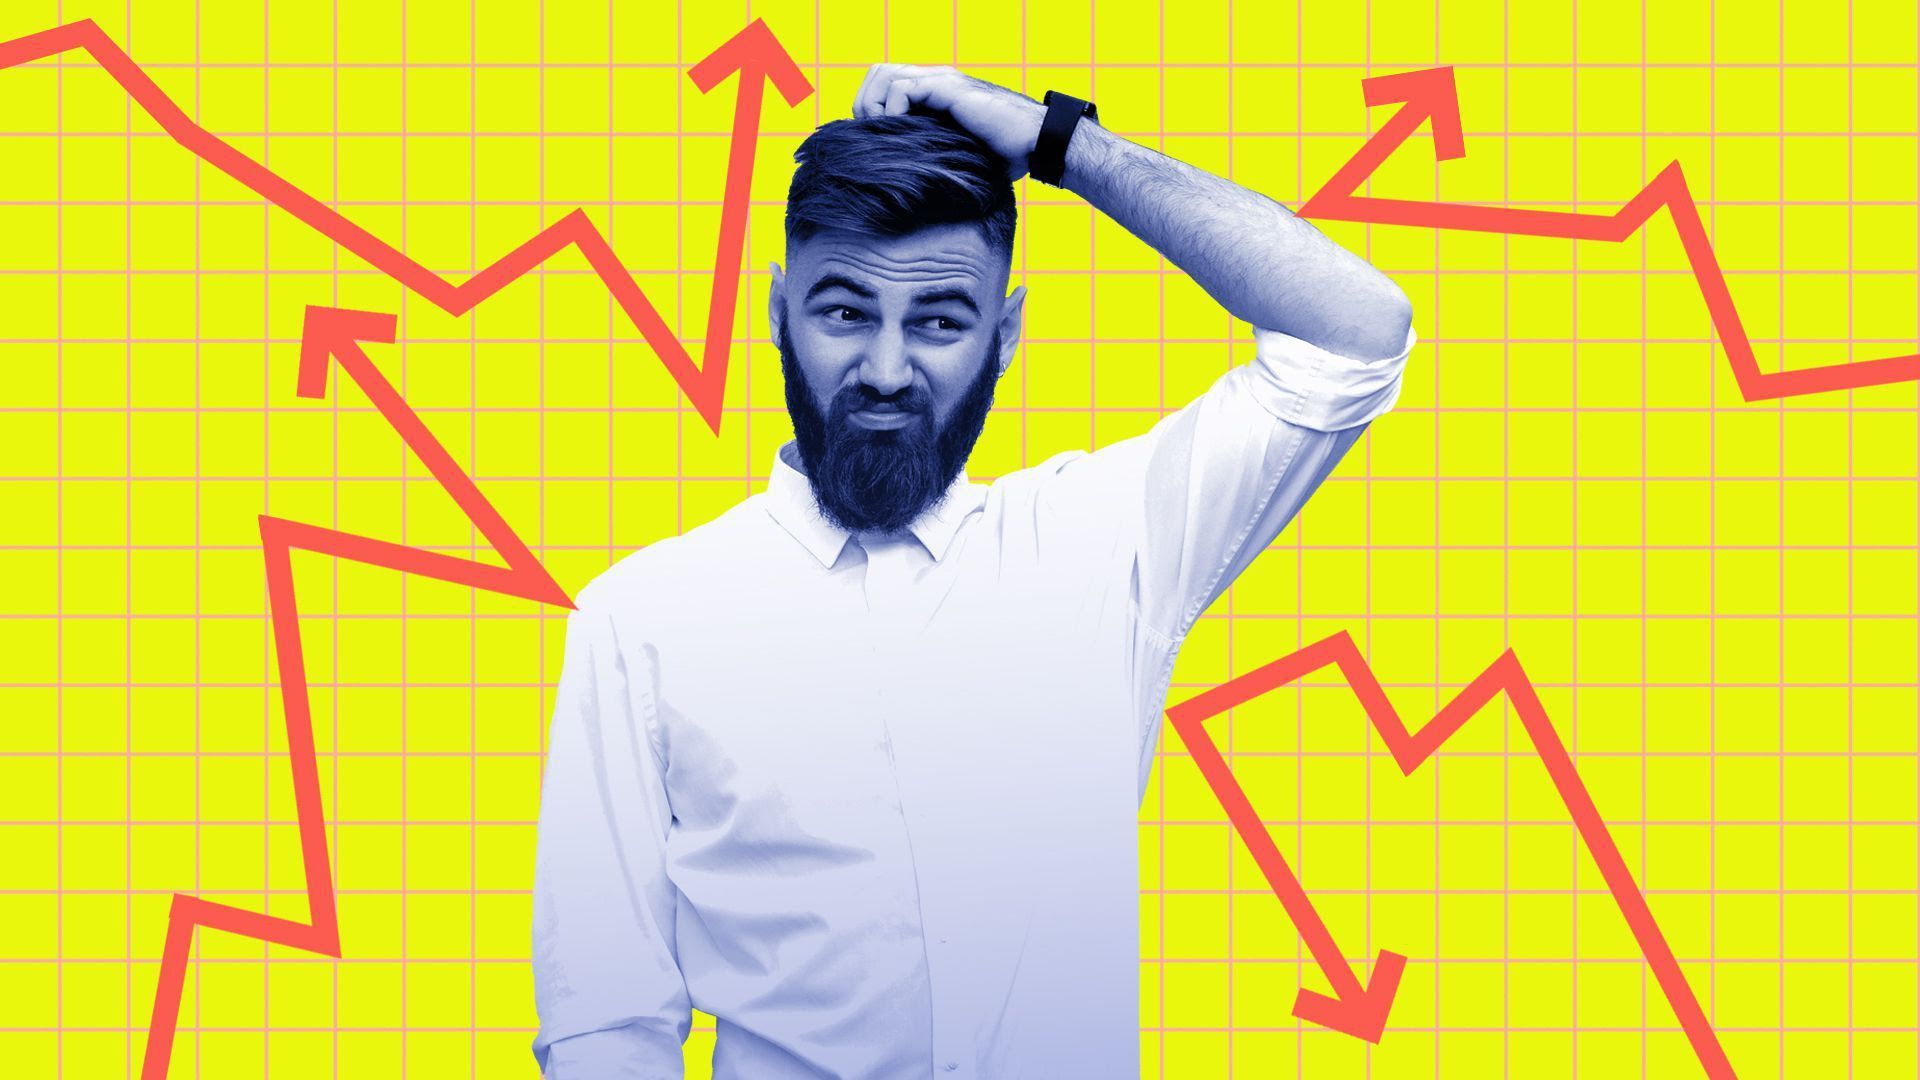 Illustration of man scratching his head with stock market arrows behind him